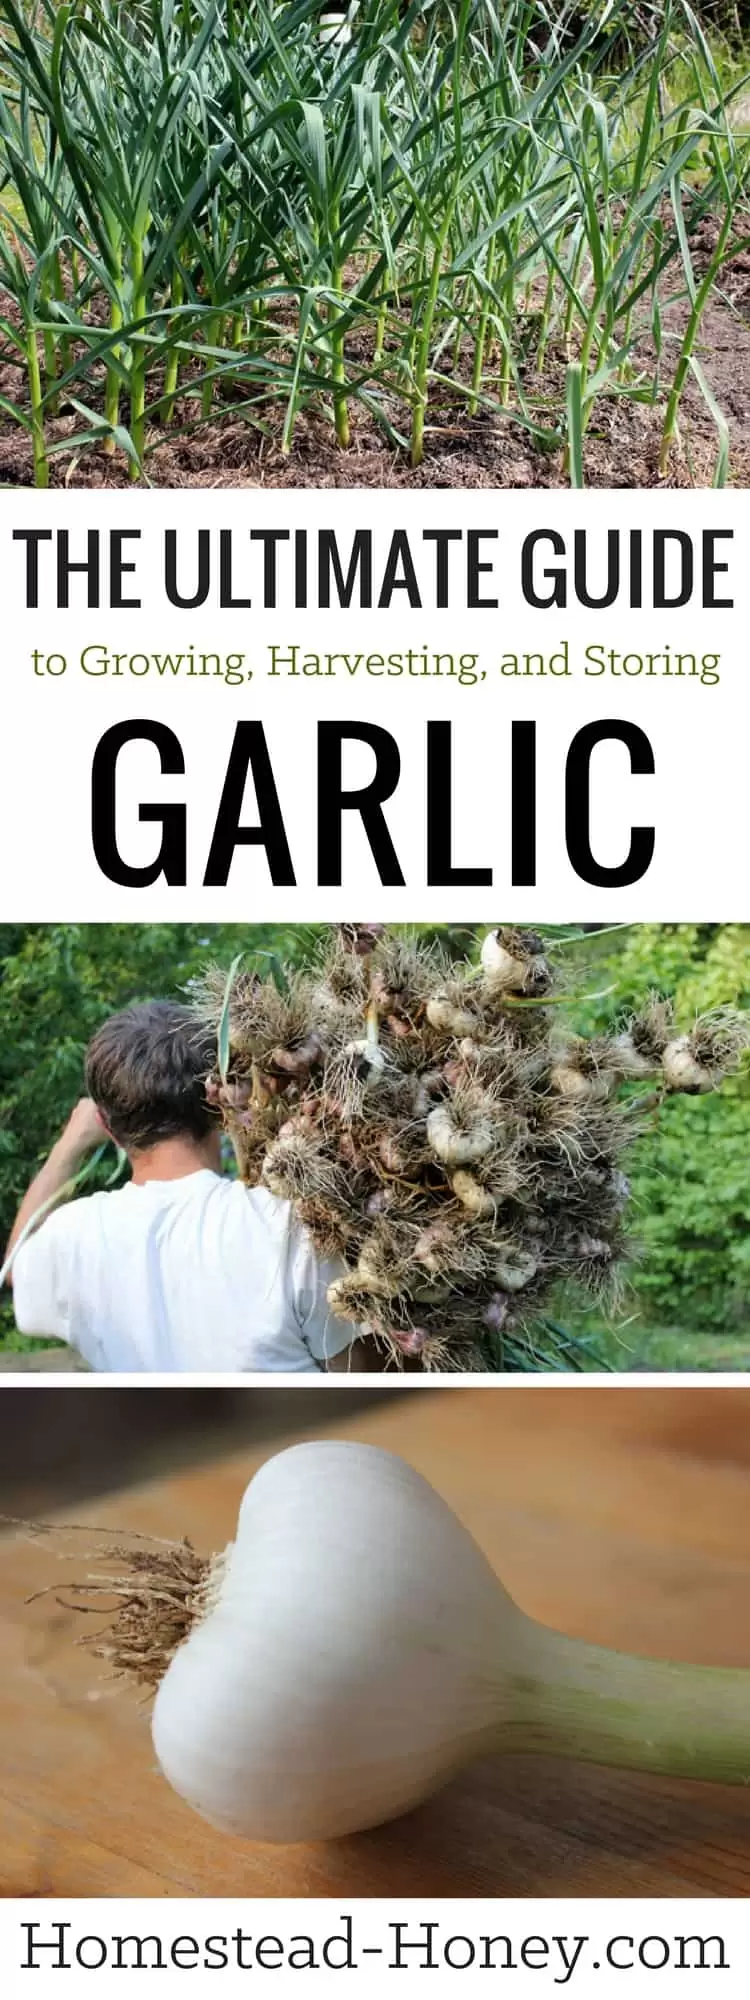 Growing, Harvesting and Storing Garlic | Treasured for its medicinal and culinary properties, garlic is also incredibly easy to grow  in your own vegetable garden. Check out my gardening tips and learn everything about growing garlic from cloves outside in this Ultimate Guide | Homestead Honey #gardening, #homesteading